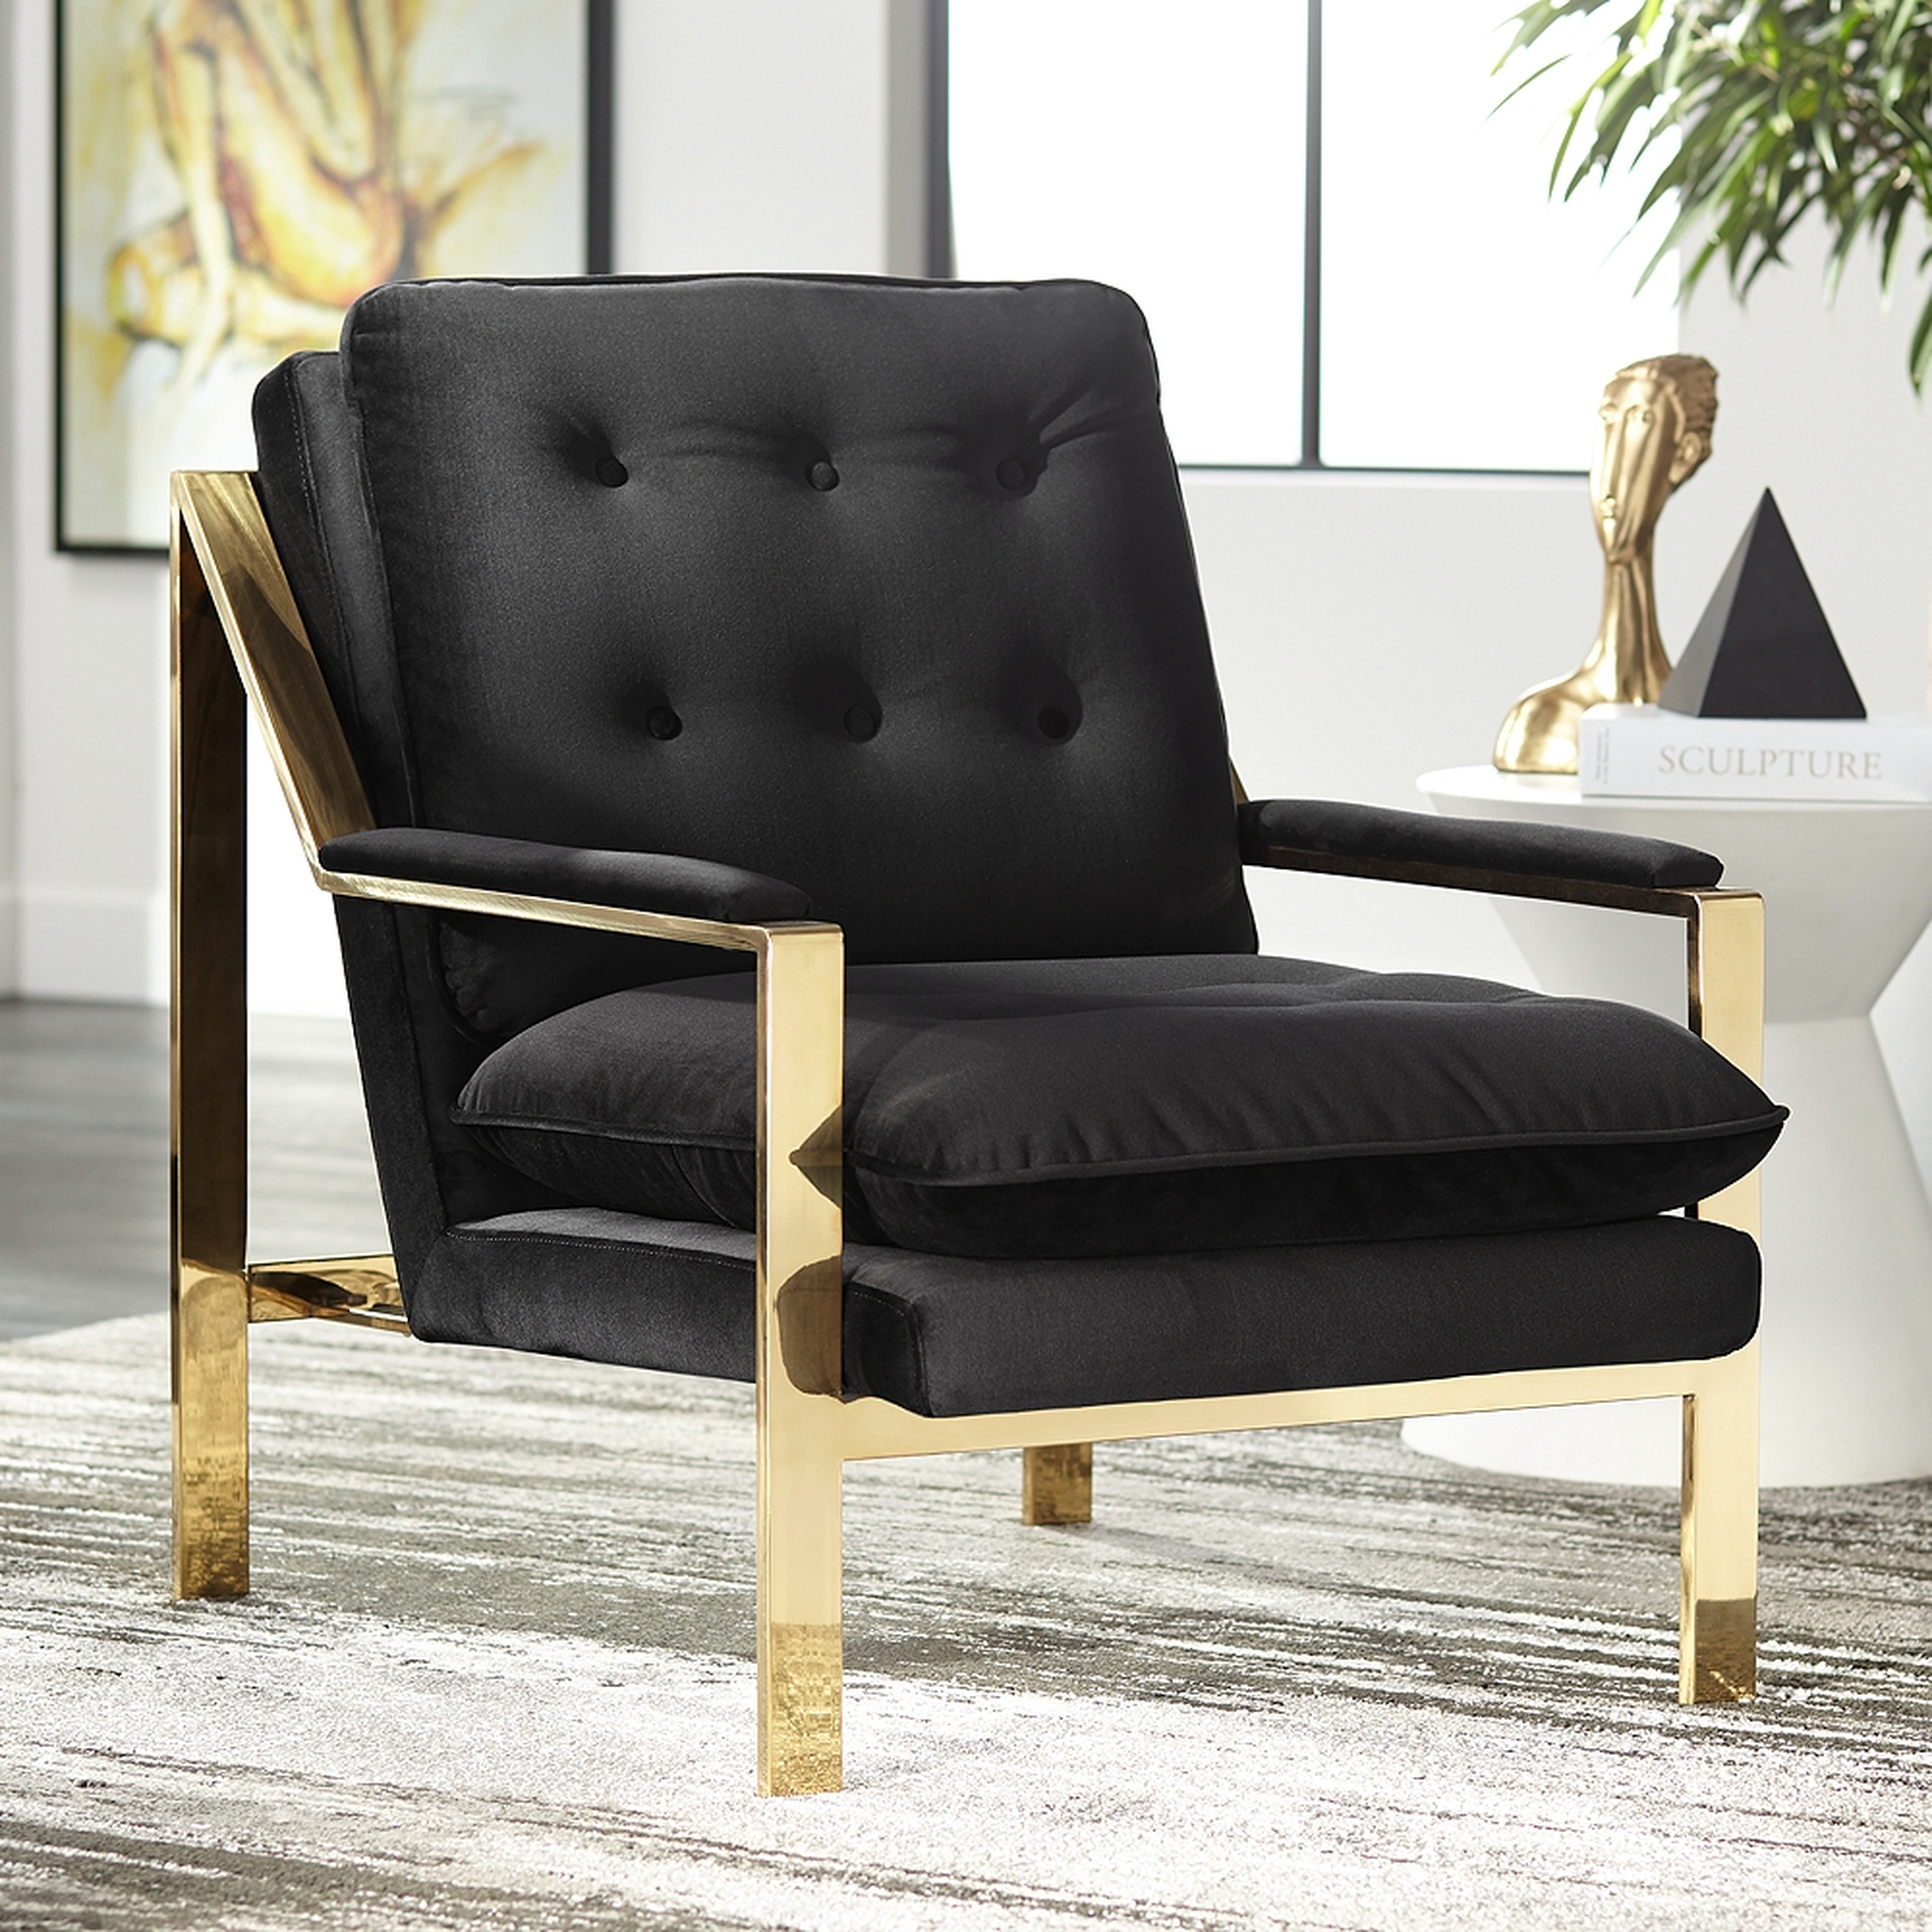 Cypress Black Velvet Tufted Accent Chair - Style # 59N30 - Lamps Plus